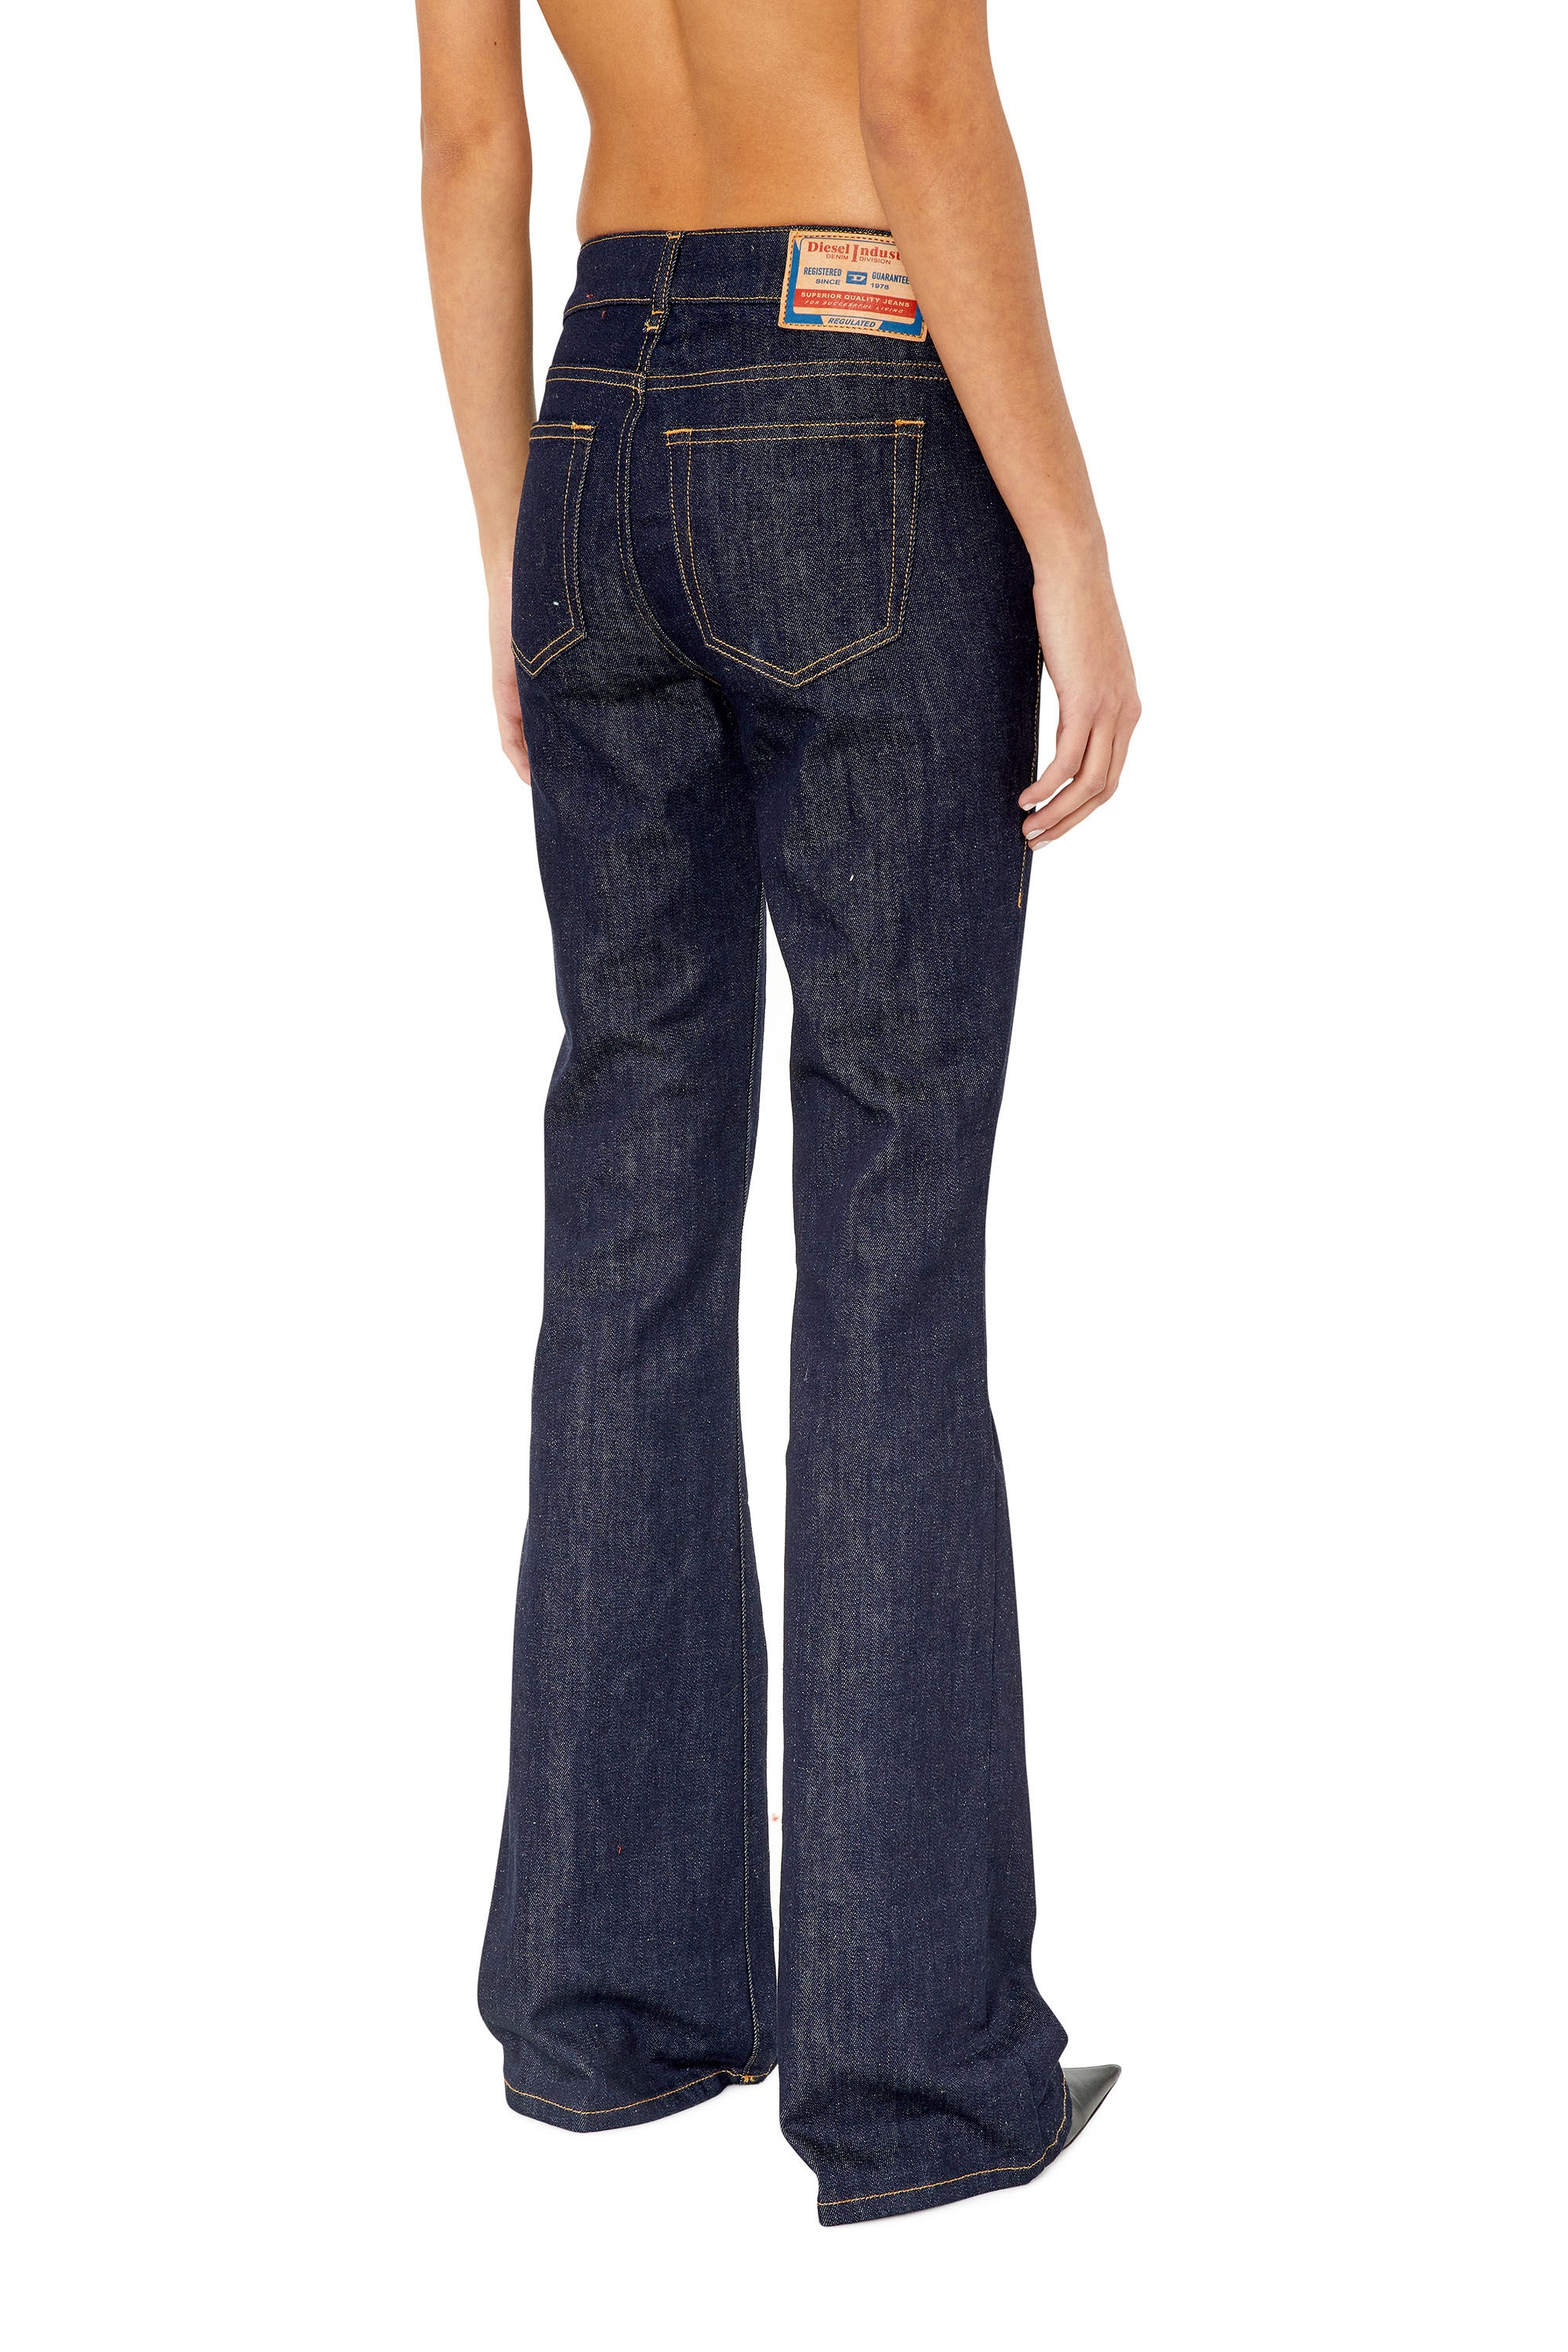 BOOTCUT AND FLARE JEANS 1969 D-EBBEY Z9B89 - 5